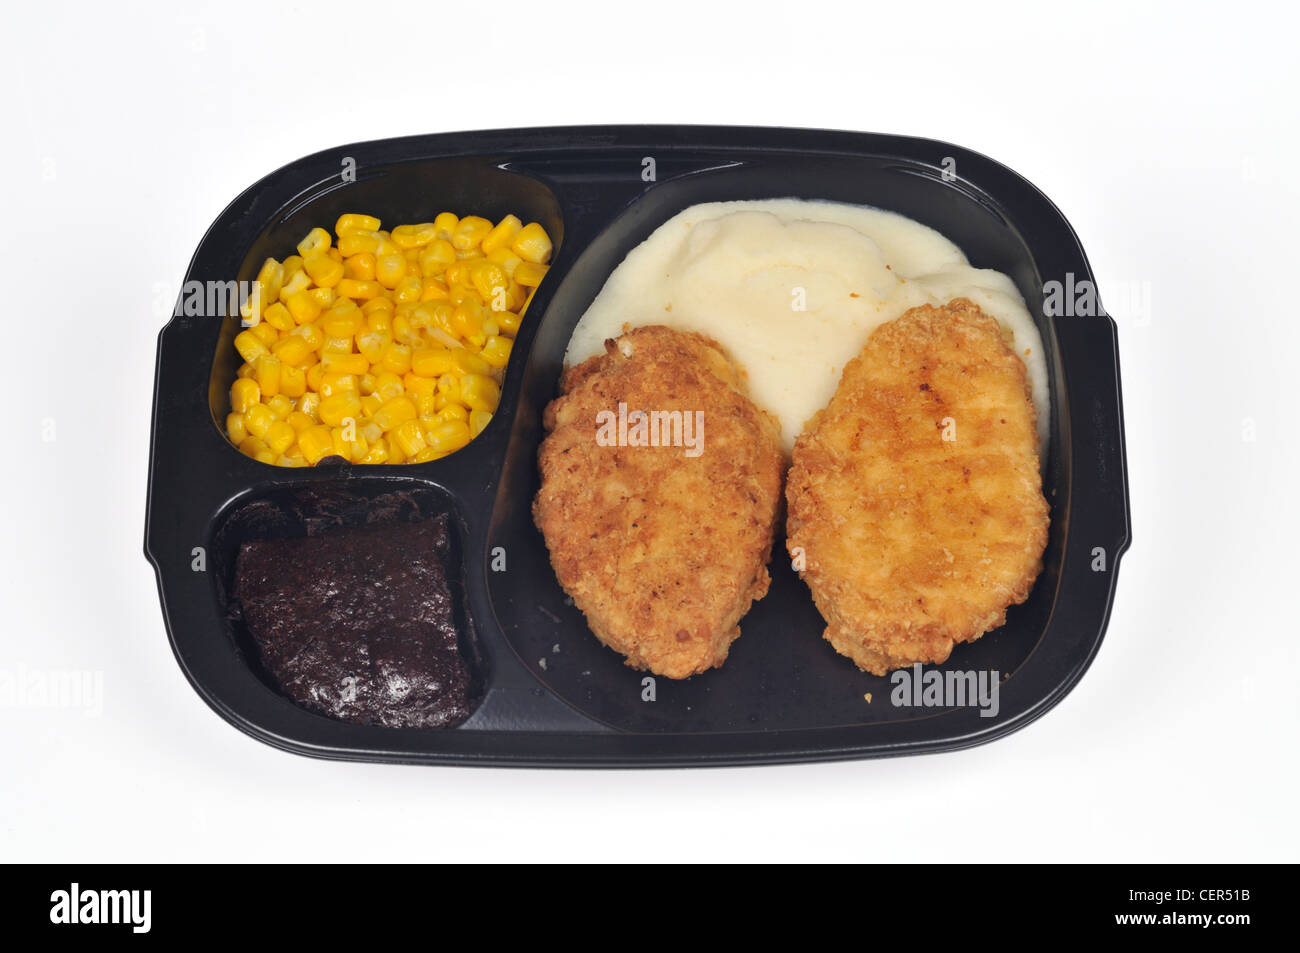 Fried chicken tv dinner with mashed potatoes and corn in black plastic disposable tray  on white background cut out. Stock Photo